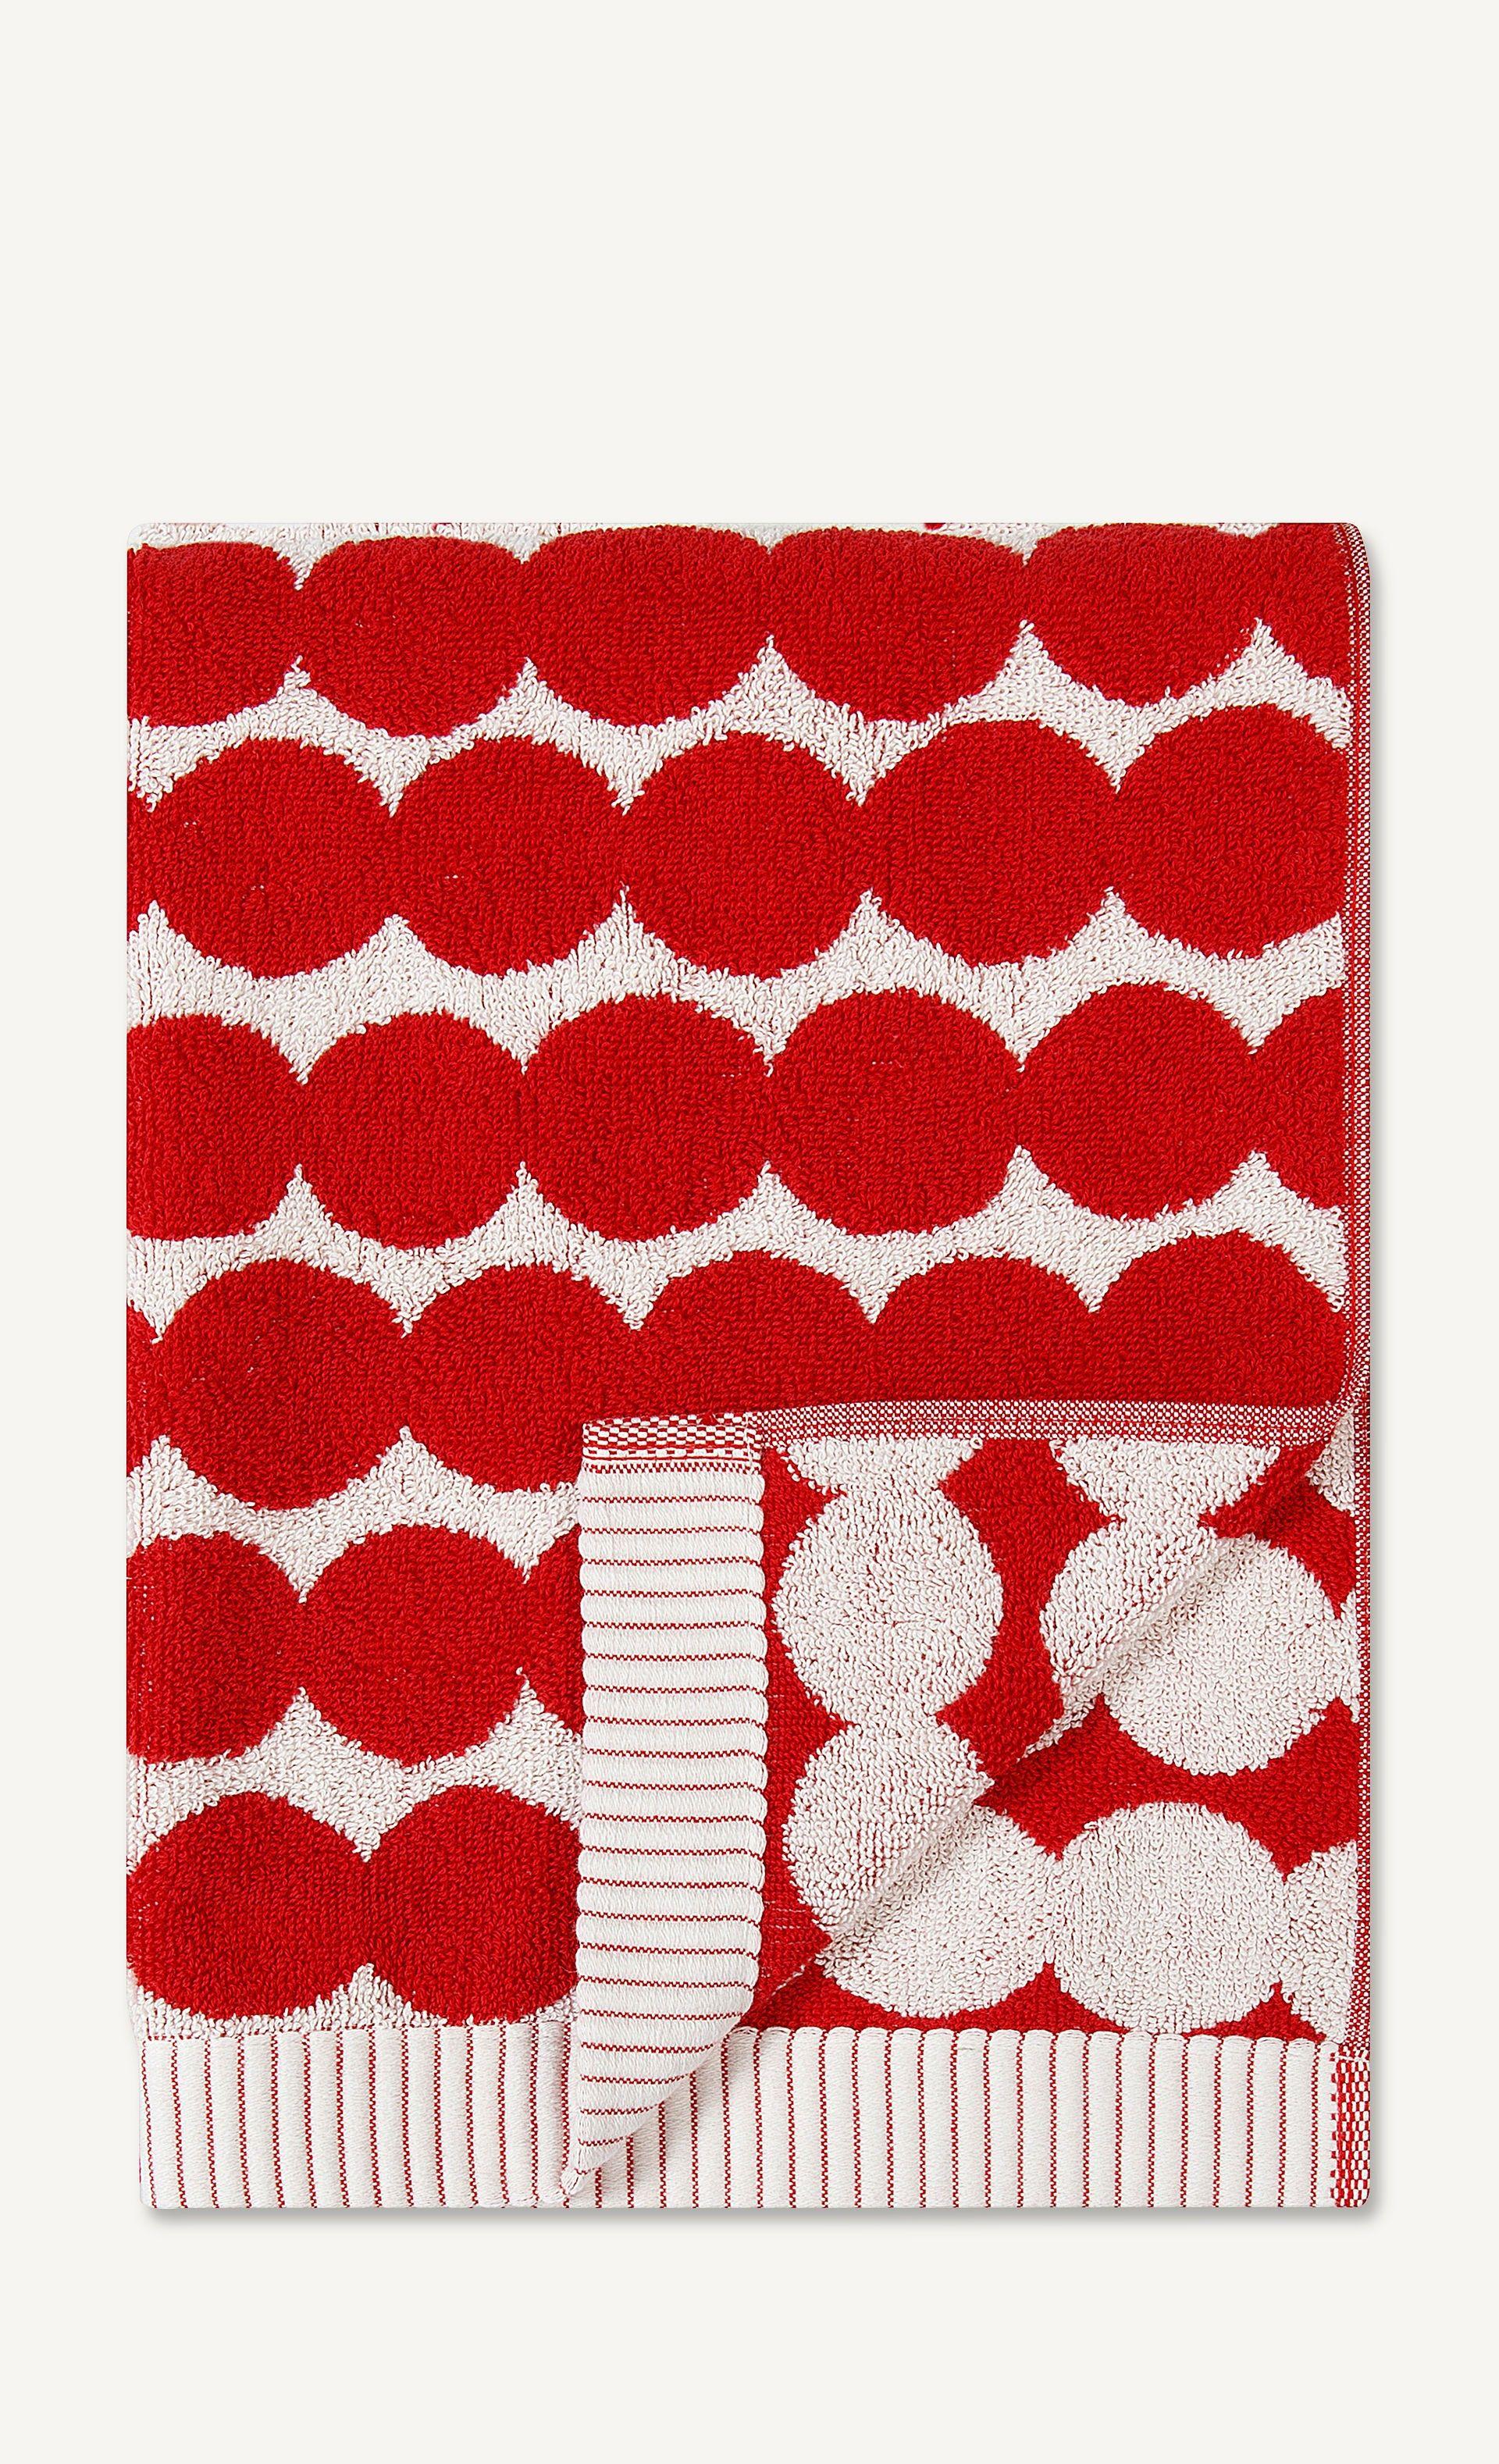 White and Red Hand Logo - Räsymatto hand towel 50x100 cm, red